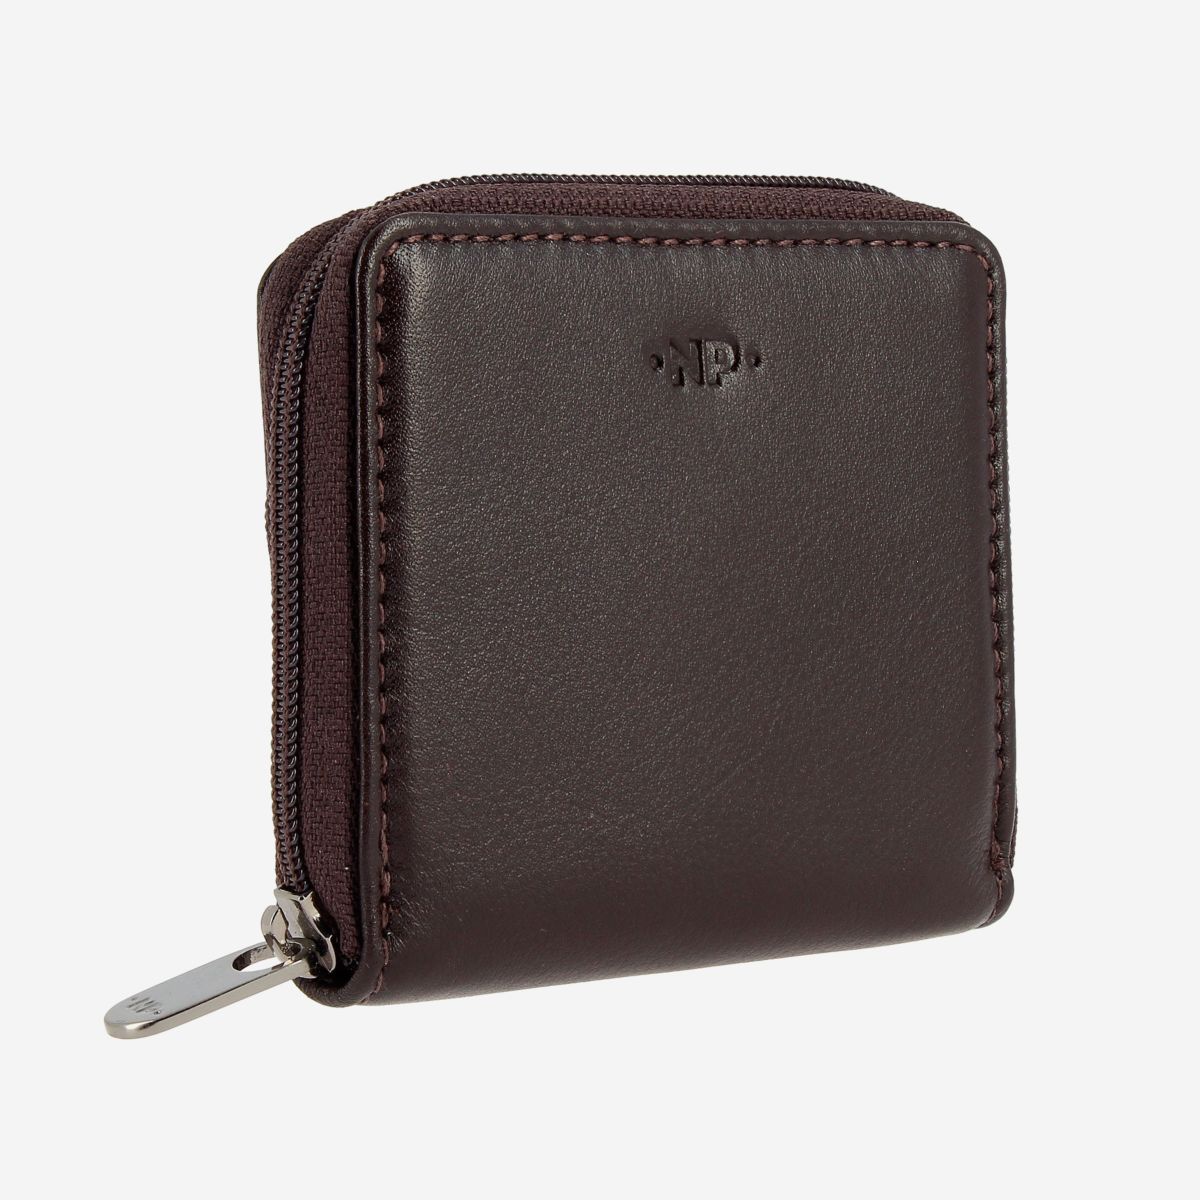 NUVOLA PELLE Leather Coin Purse - Dark Brown